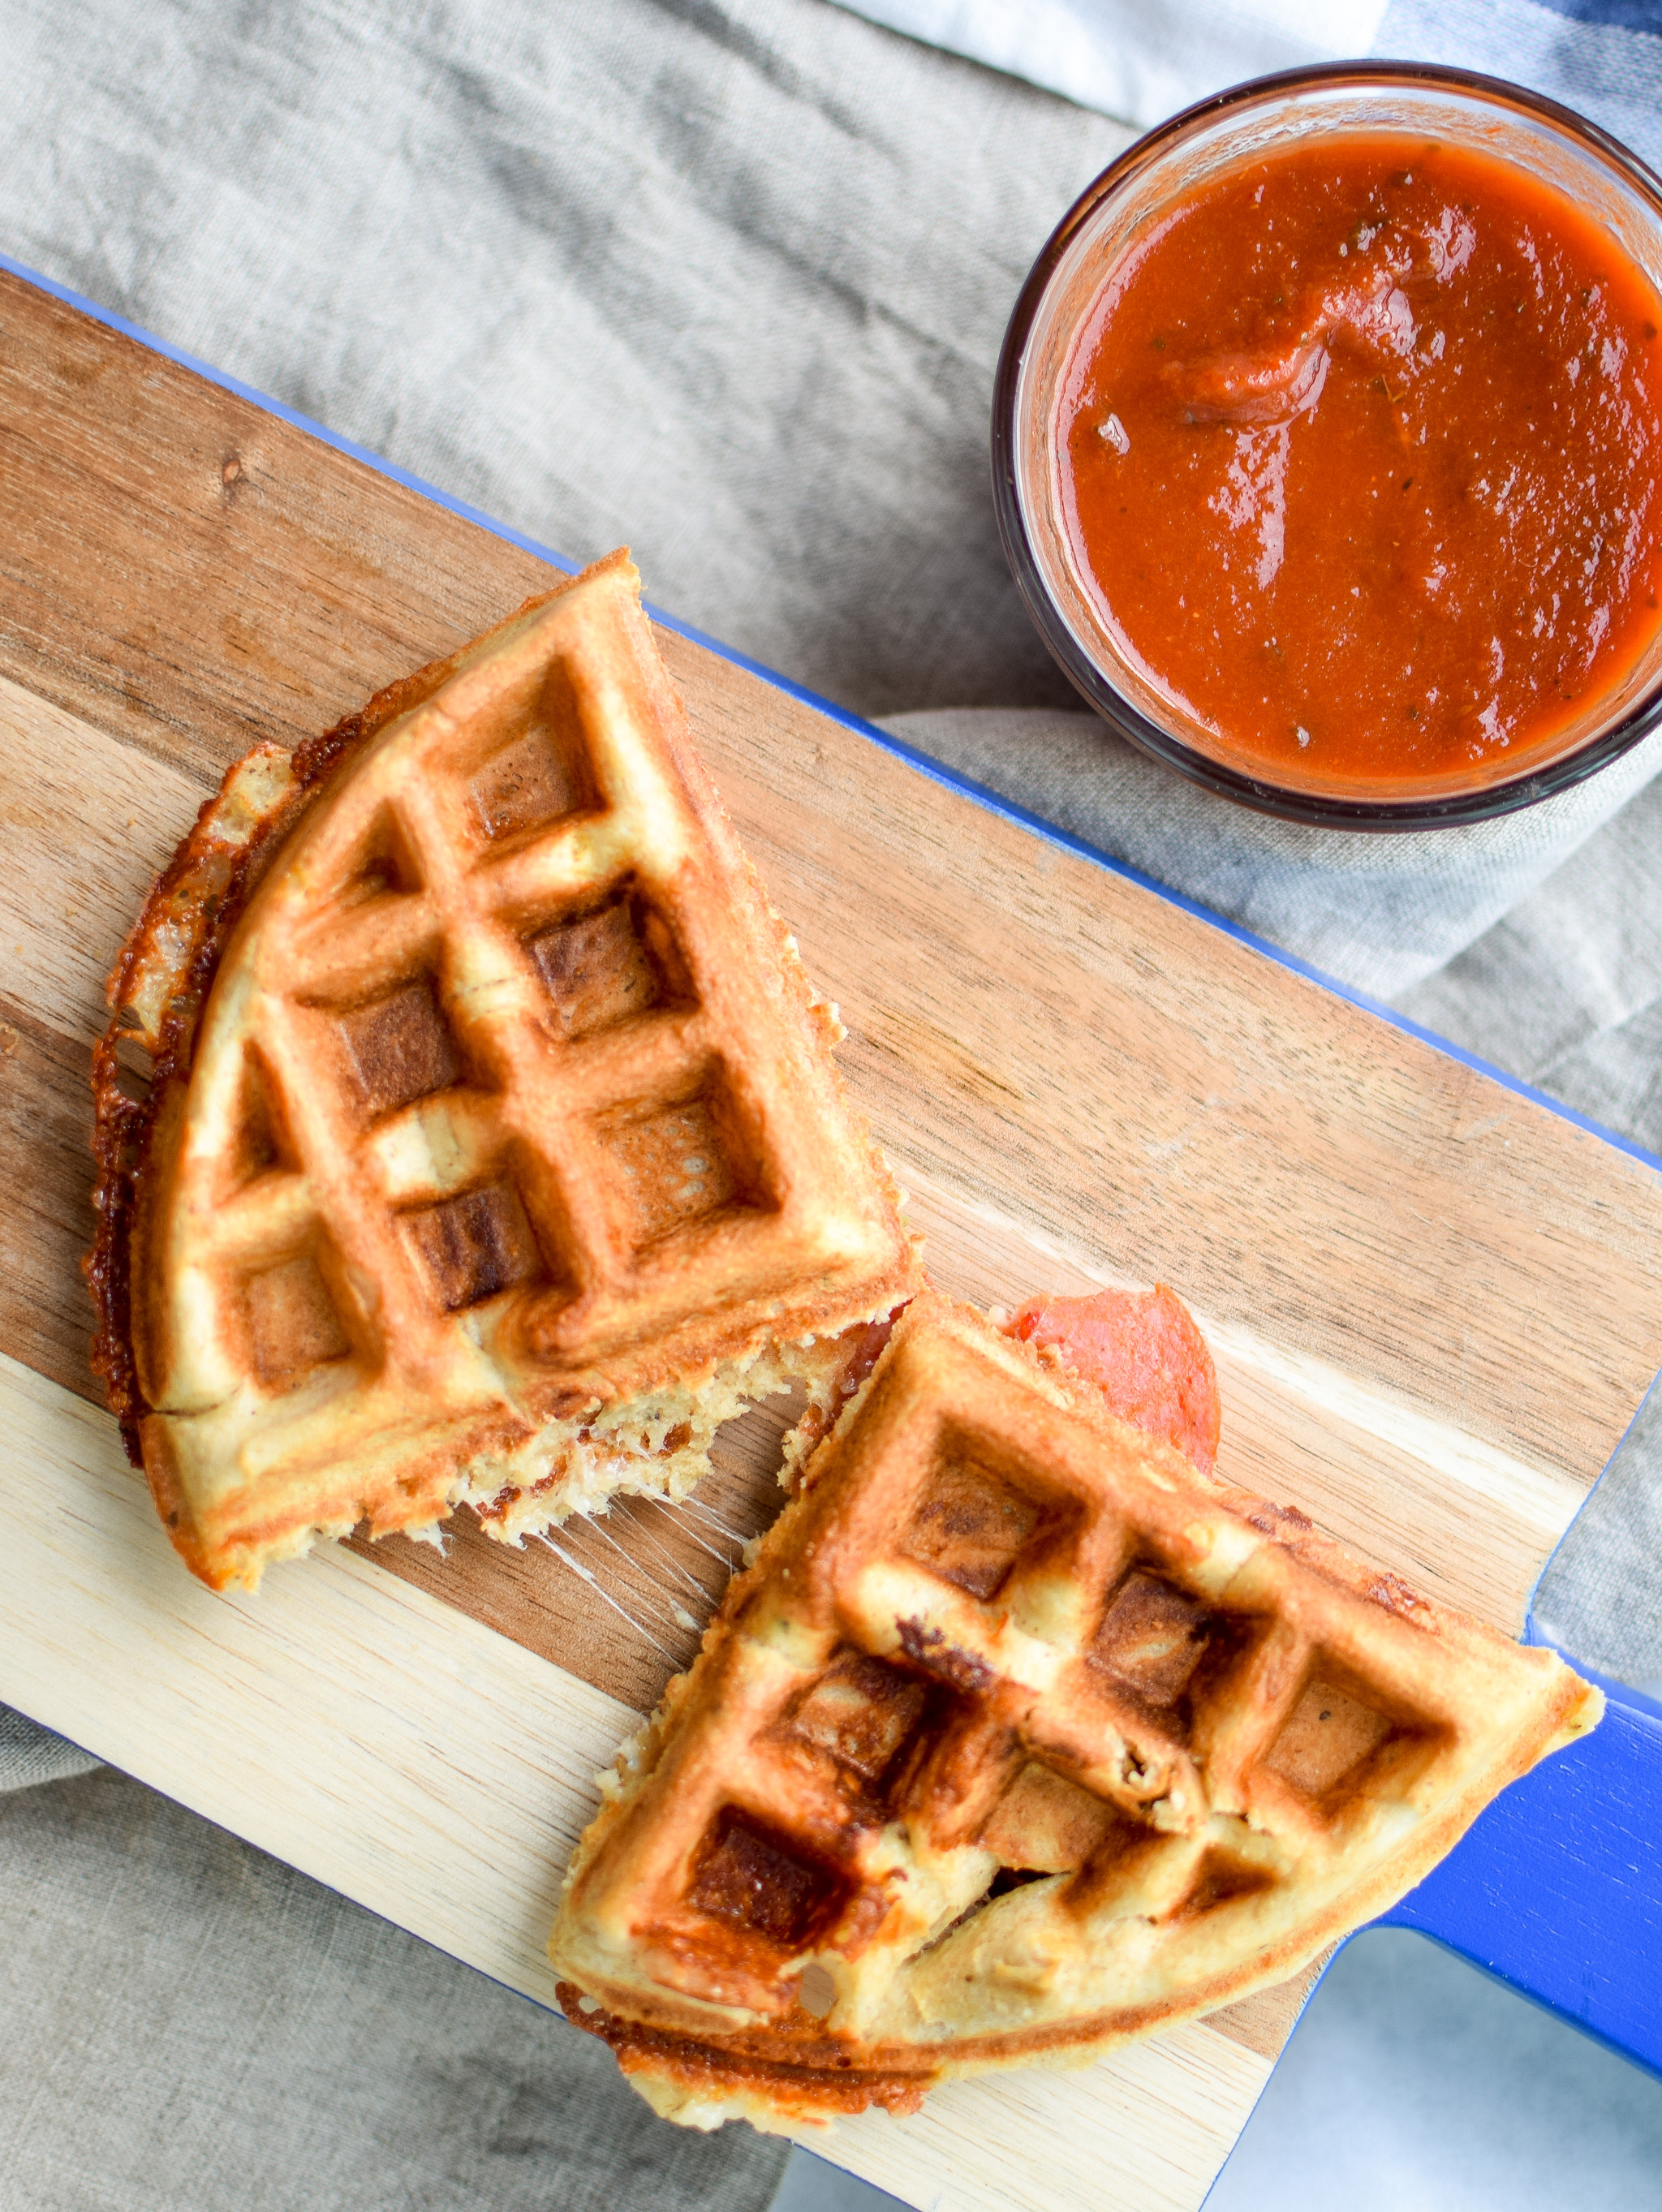 Pizza + Waffles made super easy at home! Stuffed with mozzarella and pepperoni, plus packed with protein!